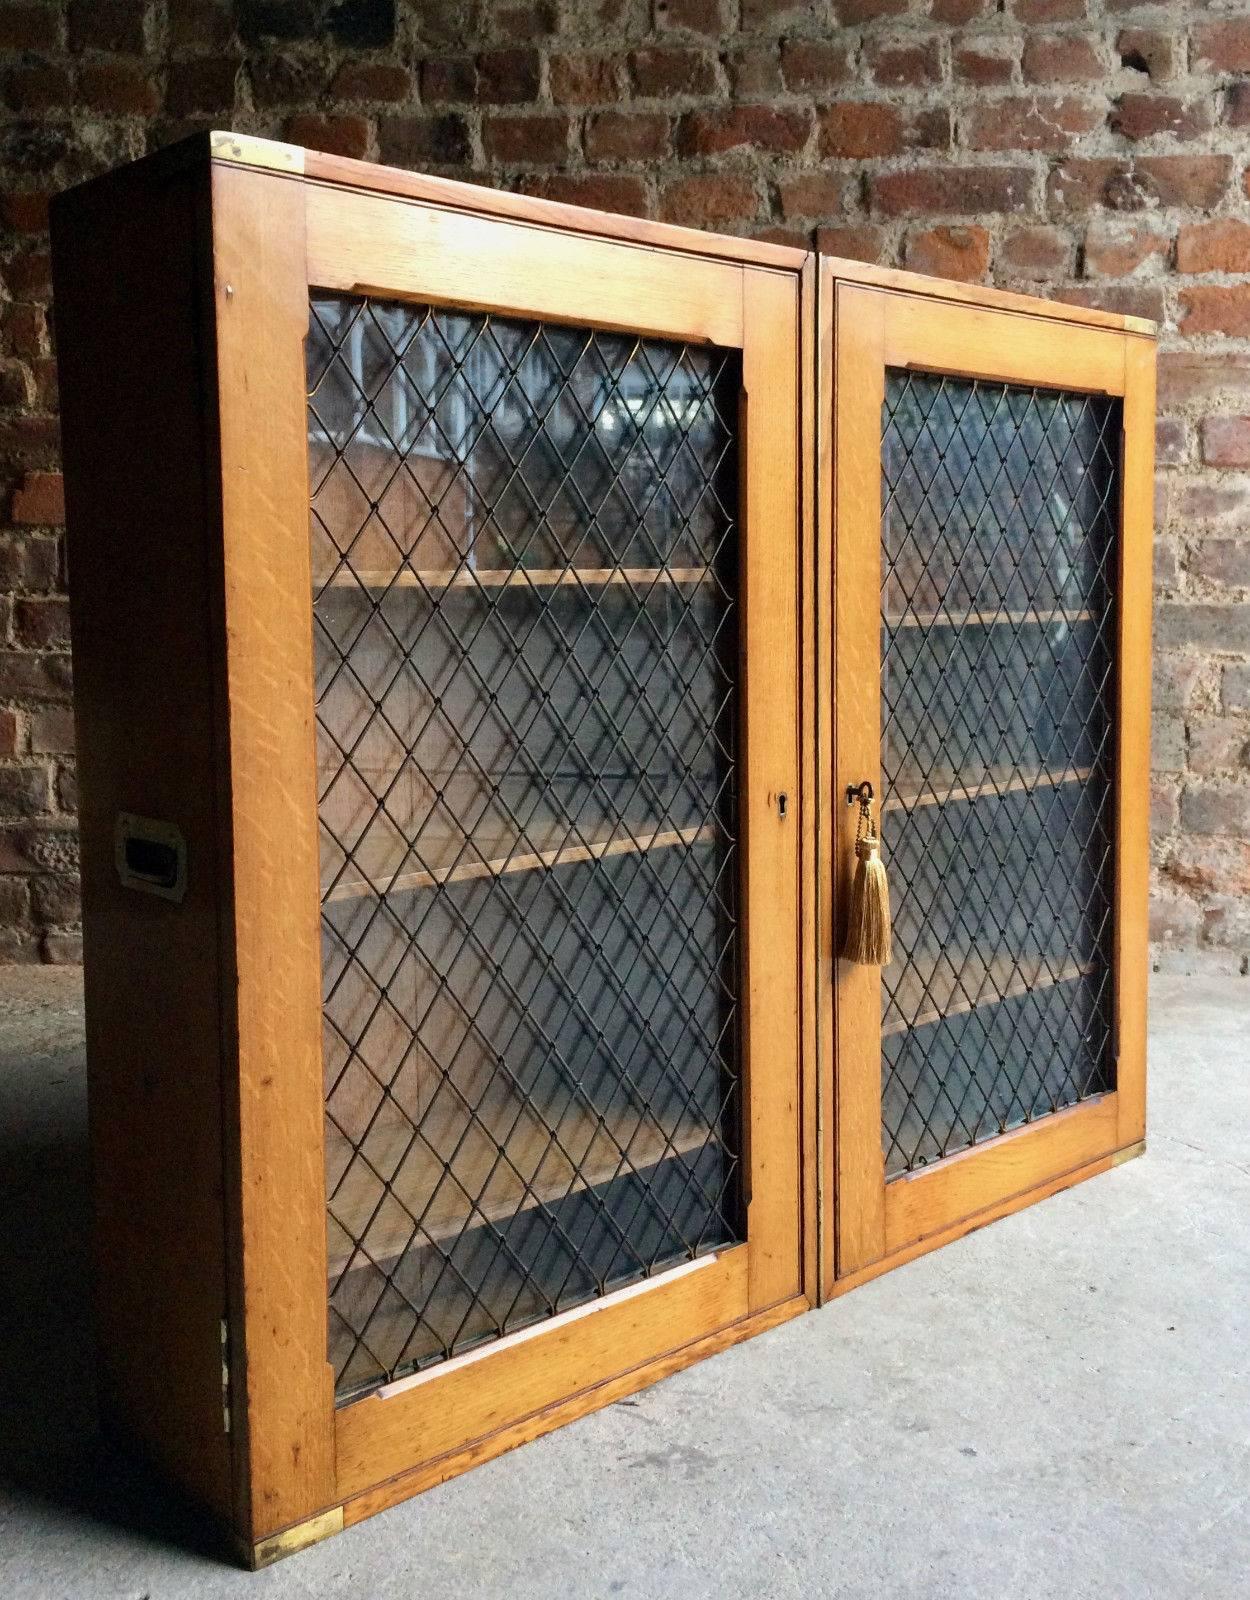 Extremely rare early 19th century military Campaign oak bookcase fitted with two glass and wire mesh doors enclosing six shelves both doors with original working locks, brass bound with carry handles to sides, comes with one original working key